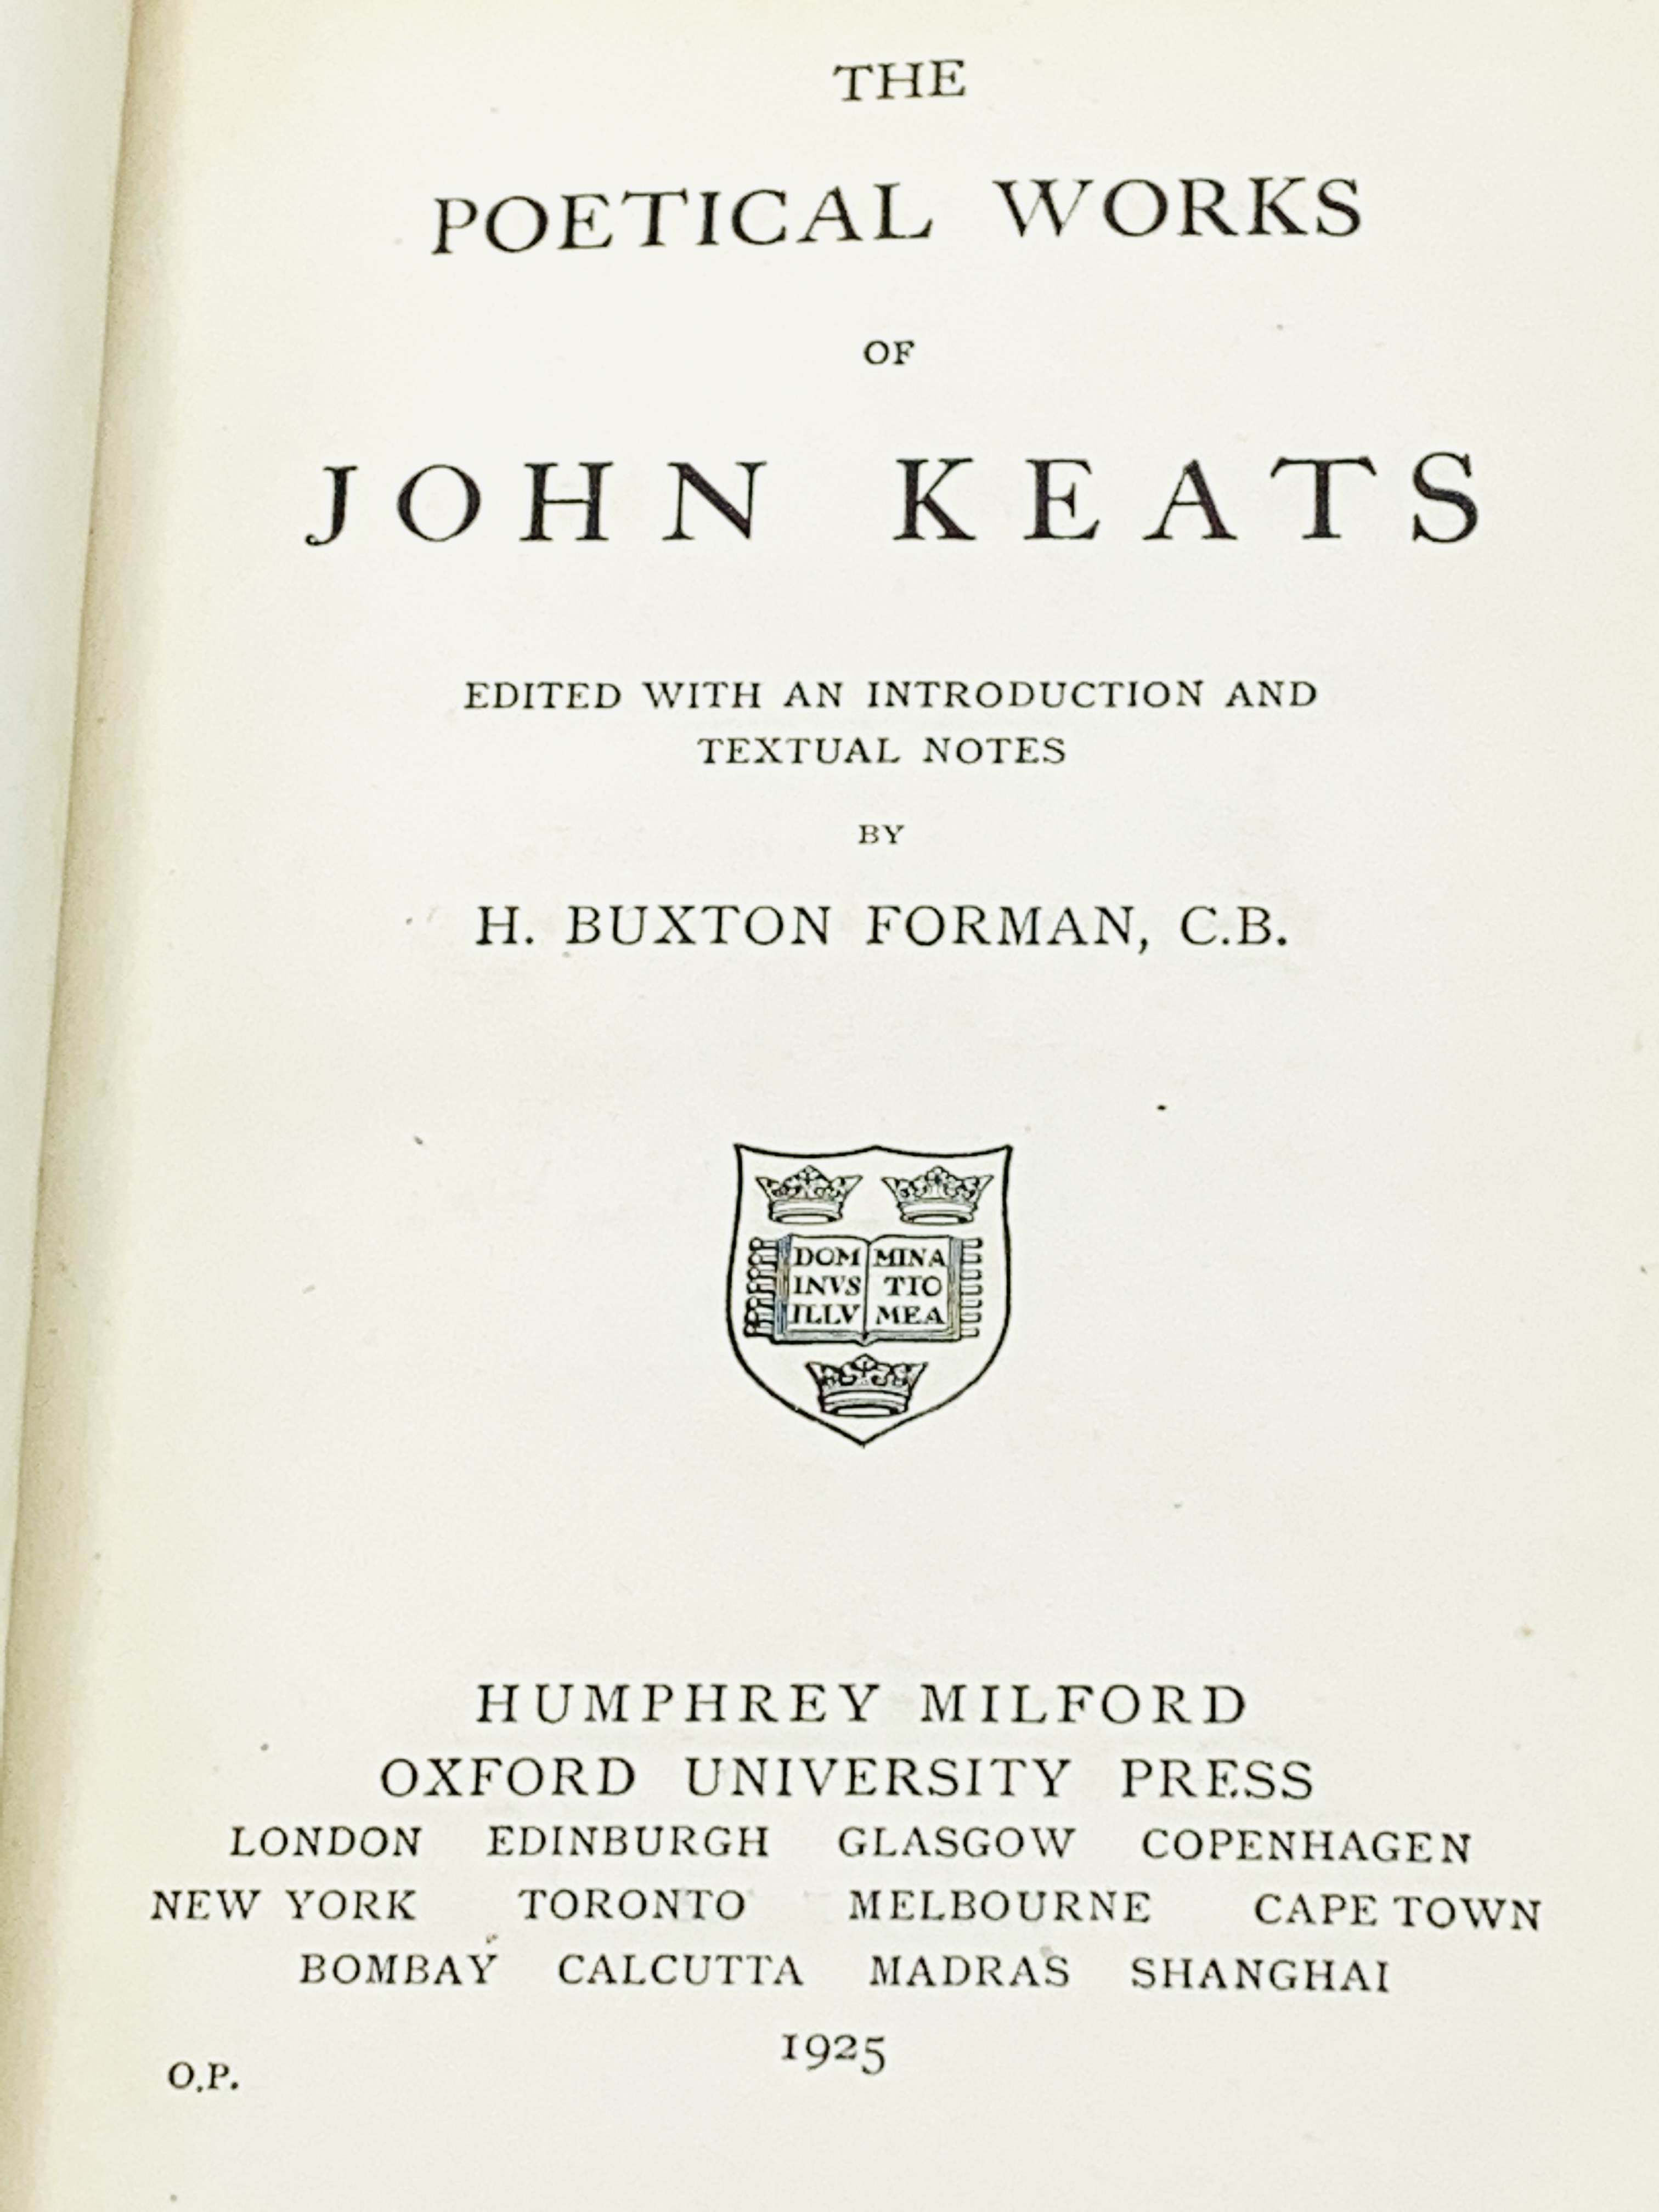 Poetical Works of John Keats in full calf leather, religious triptych, and circular silver frame - Image 4 of 4